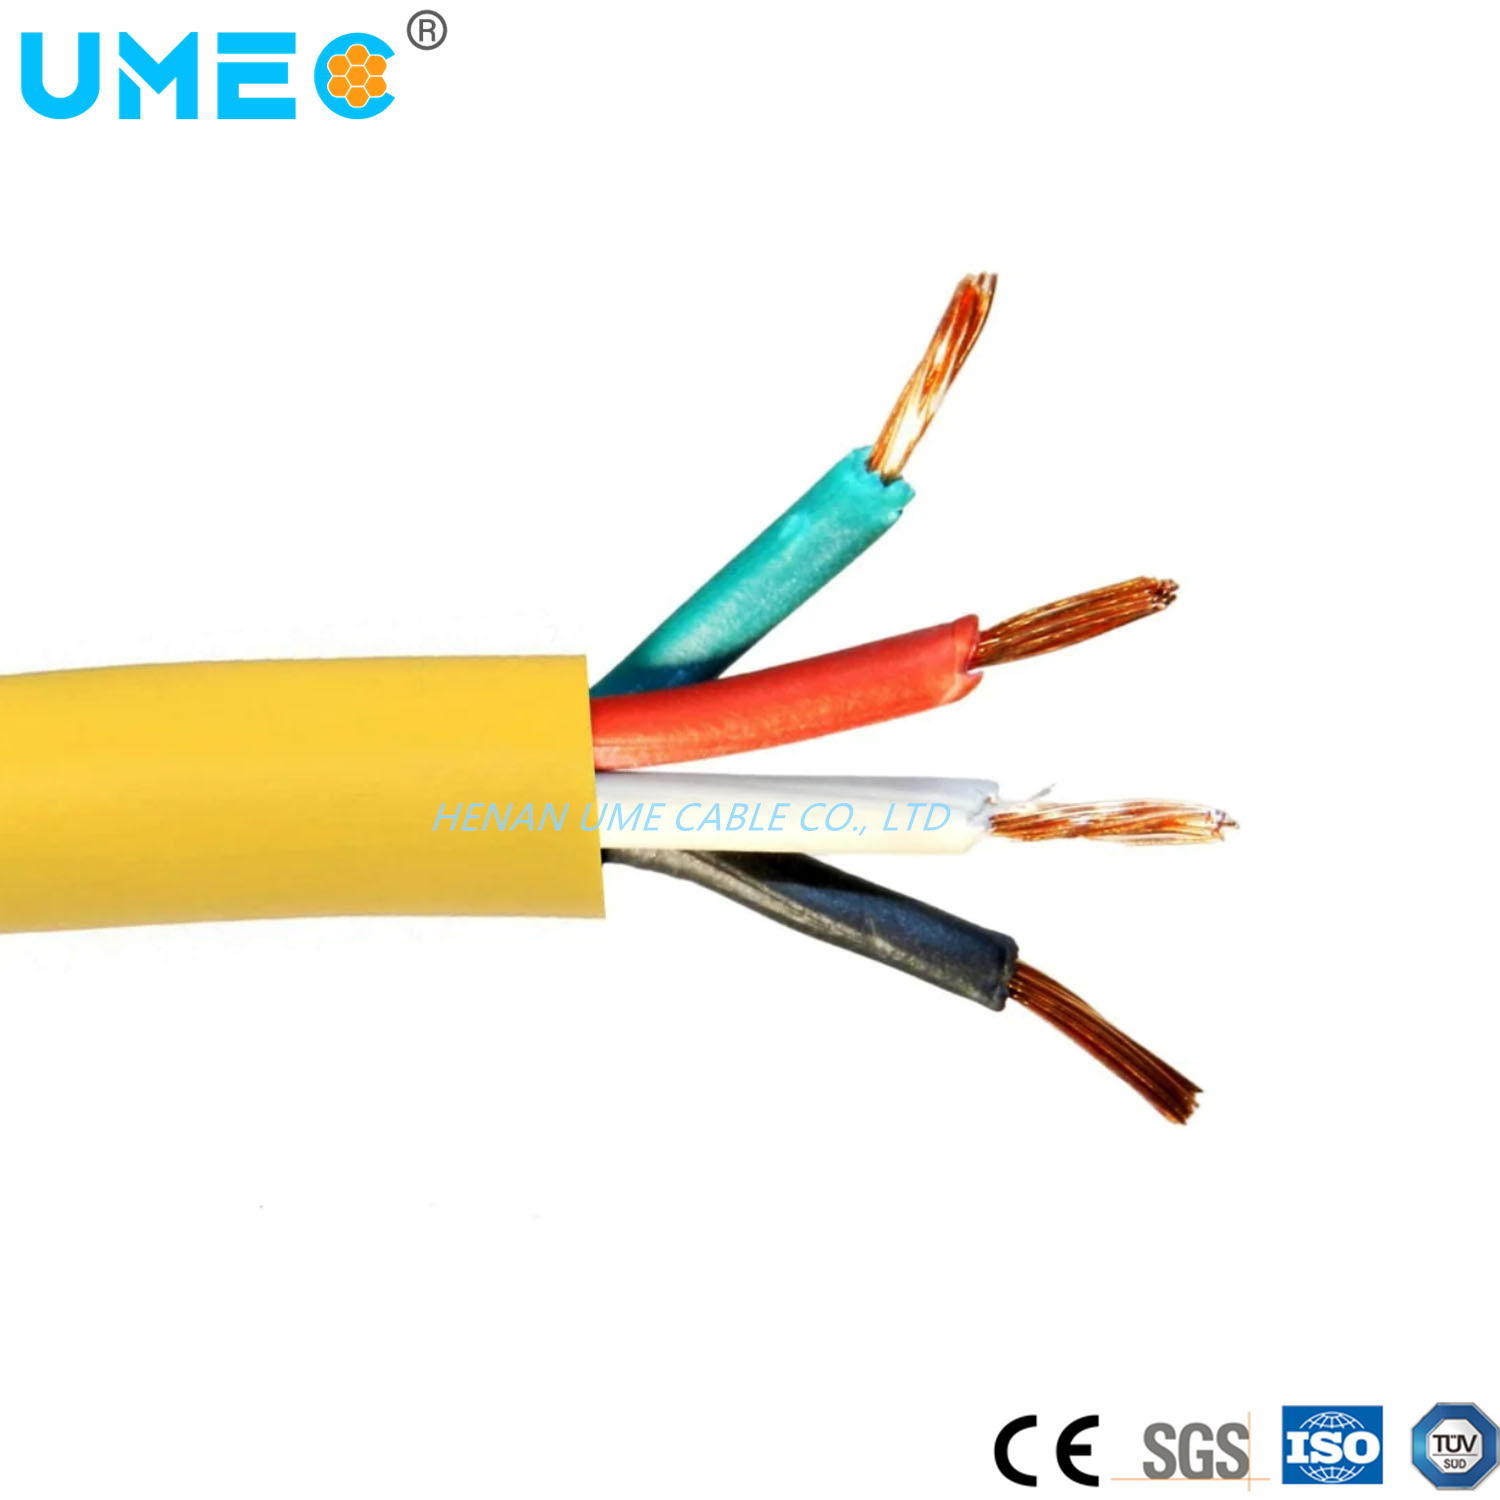 10/12 AWG Rubber Insulation and Sheath Soow Cable